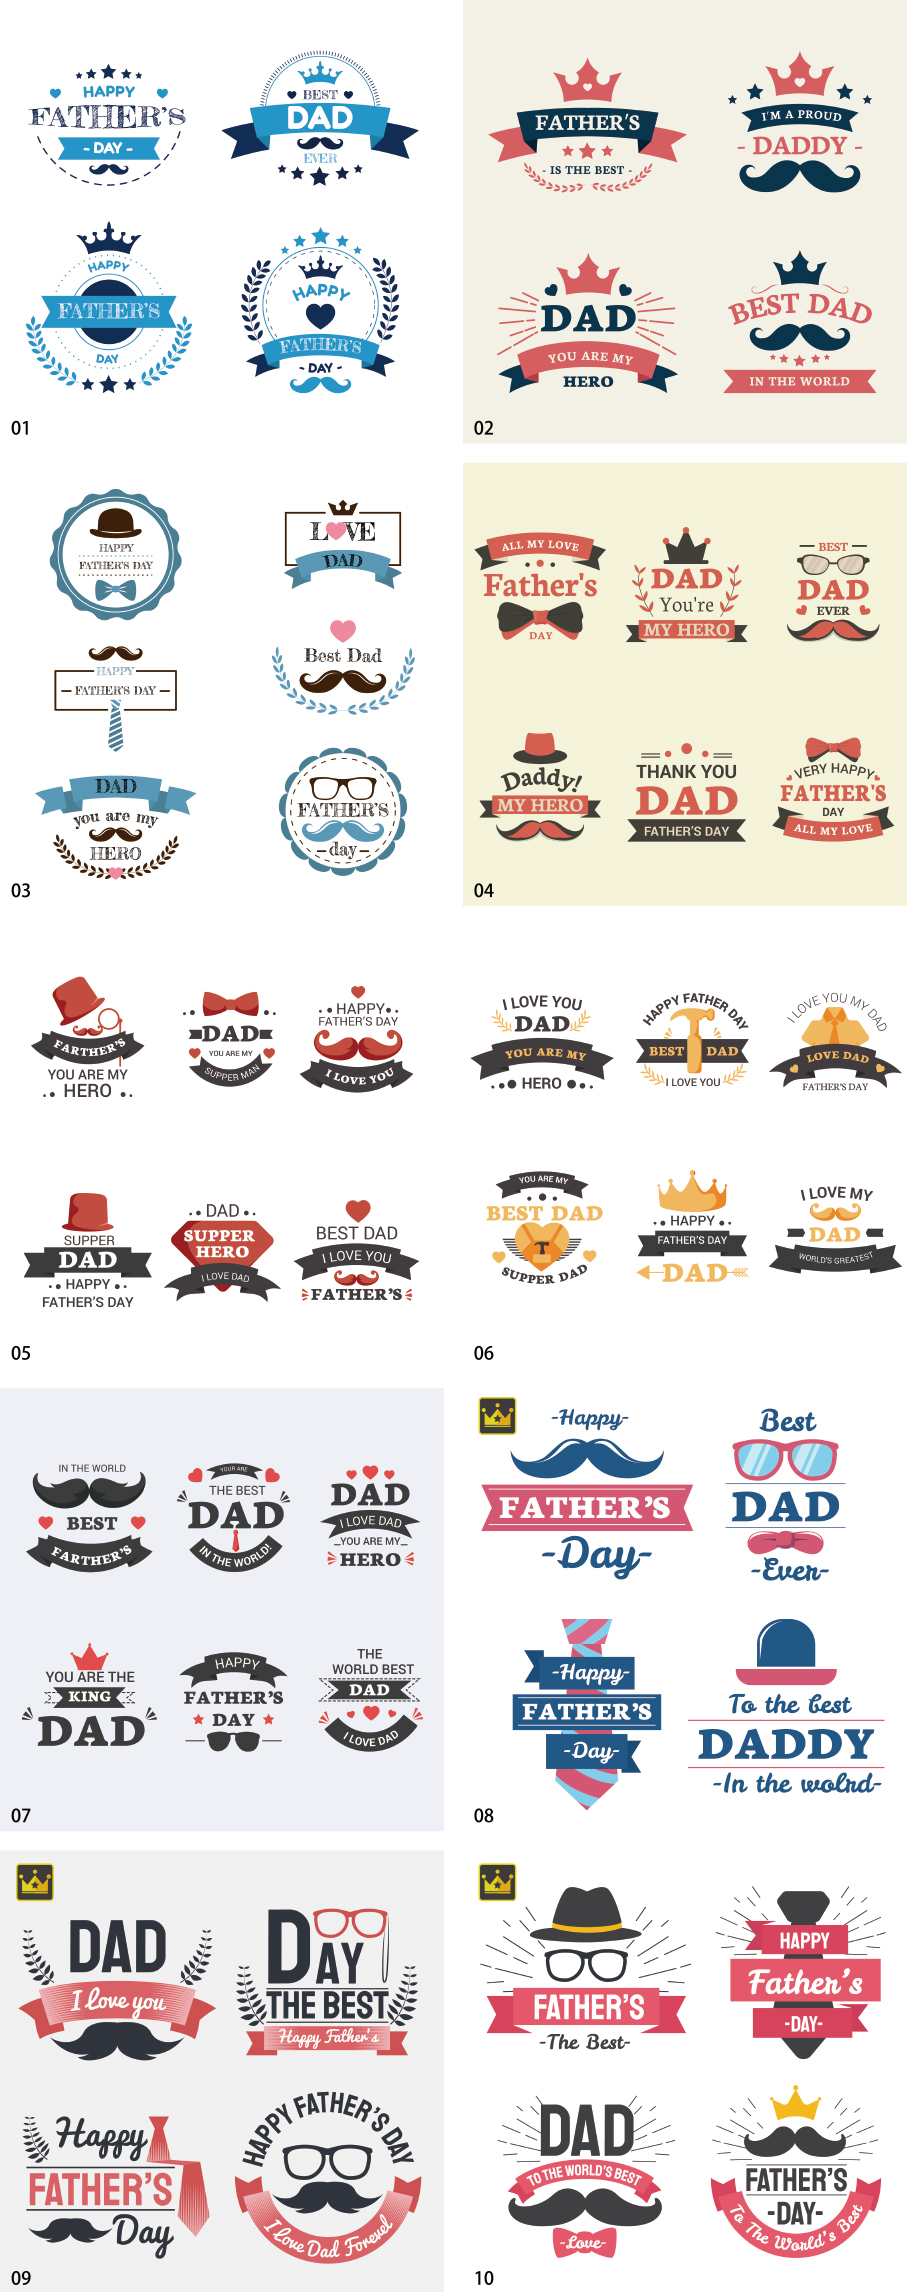 Fathers Day logo design material